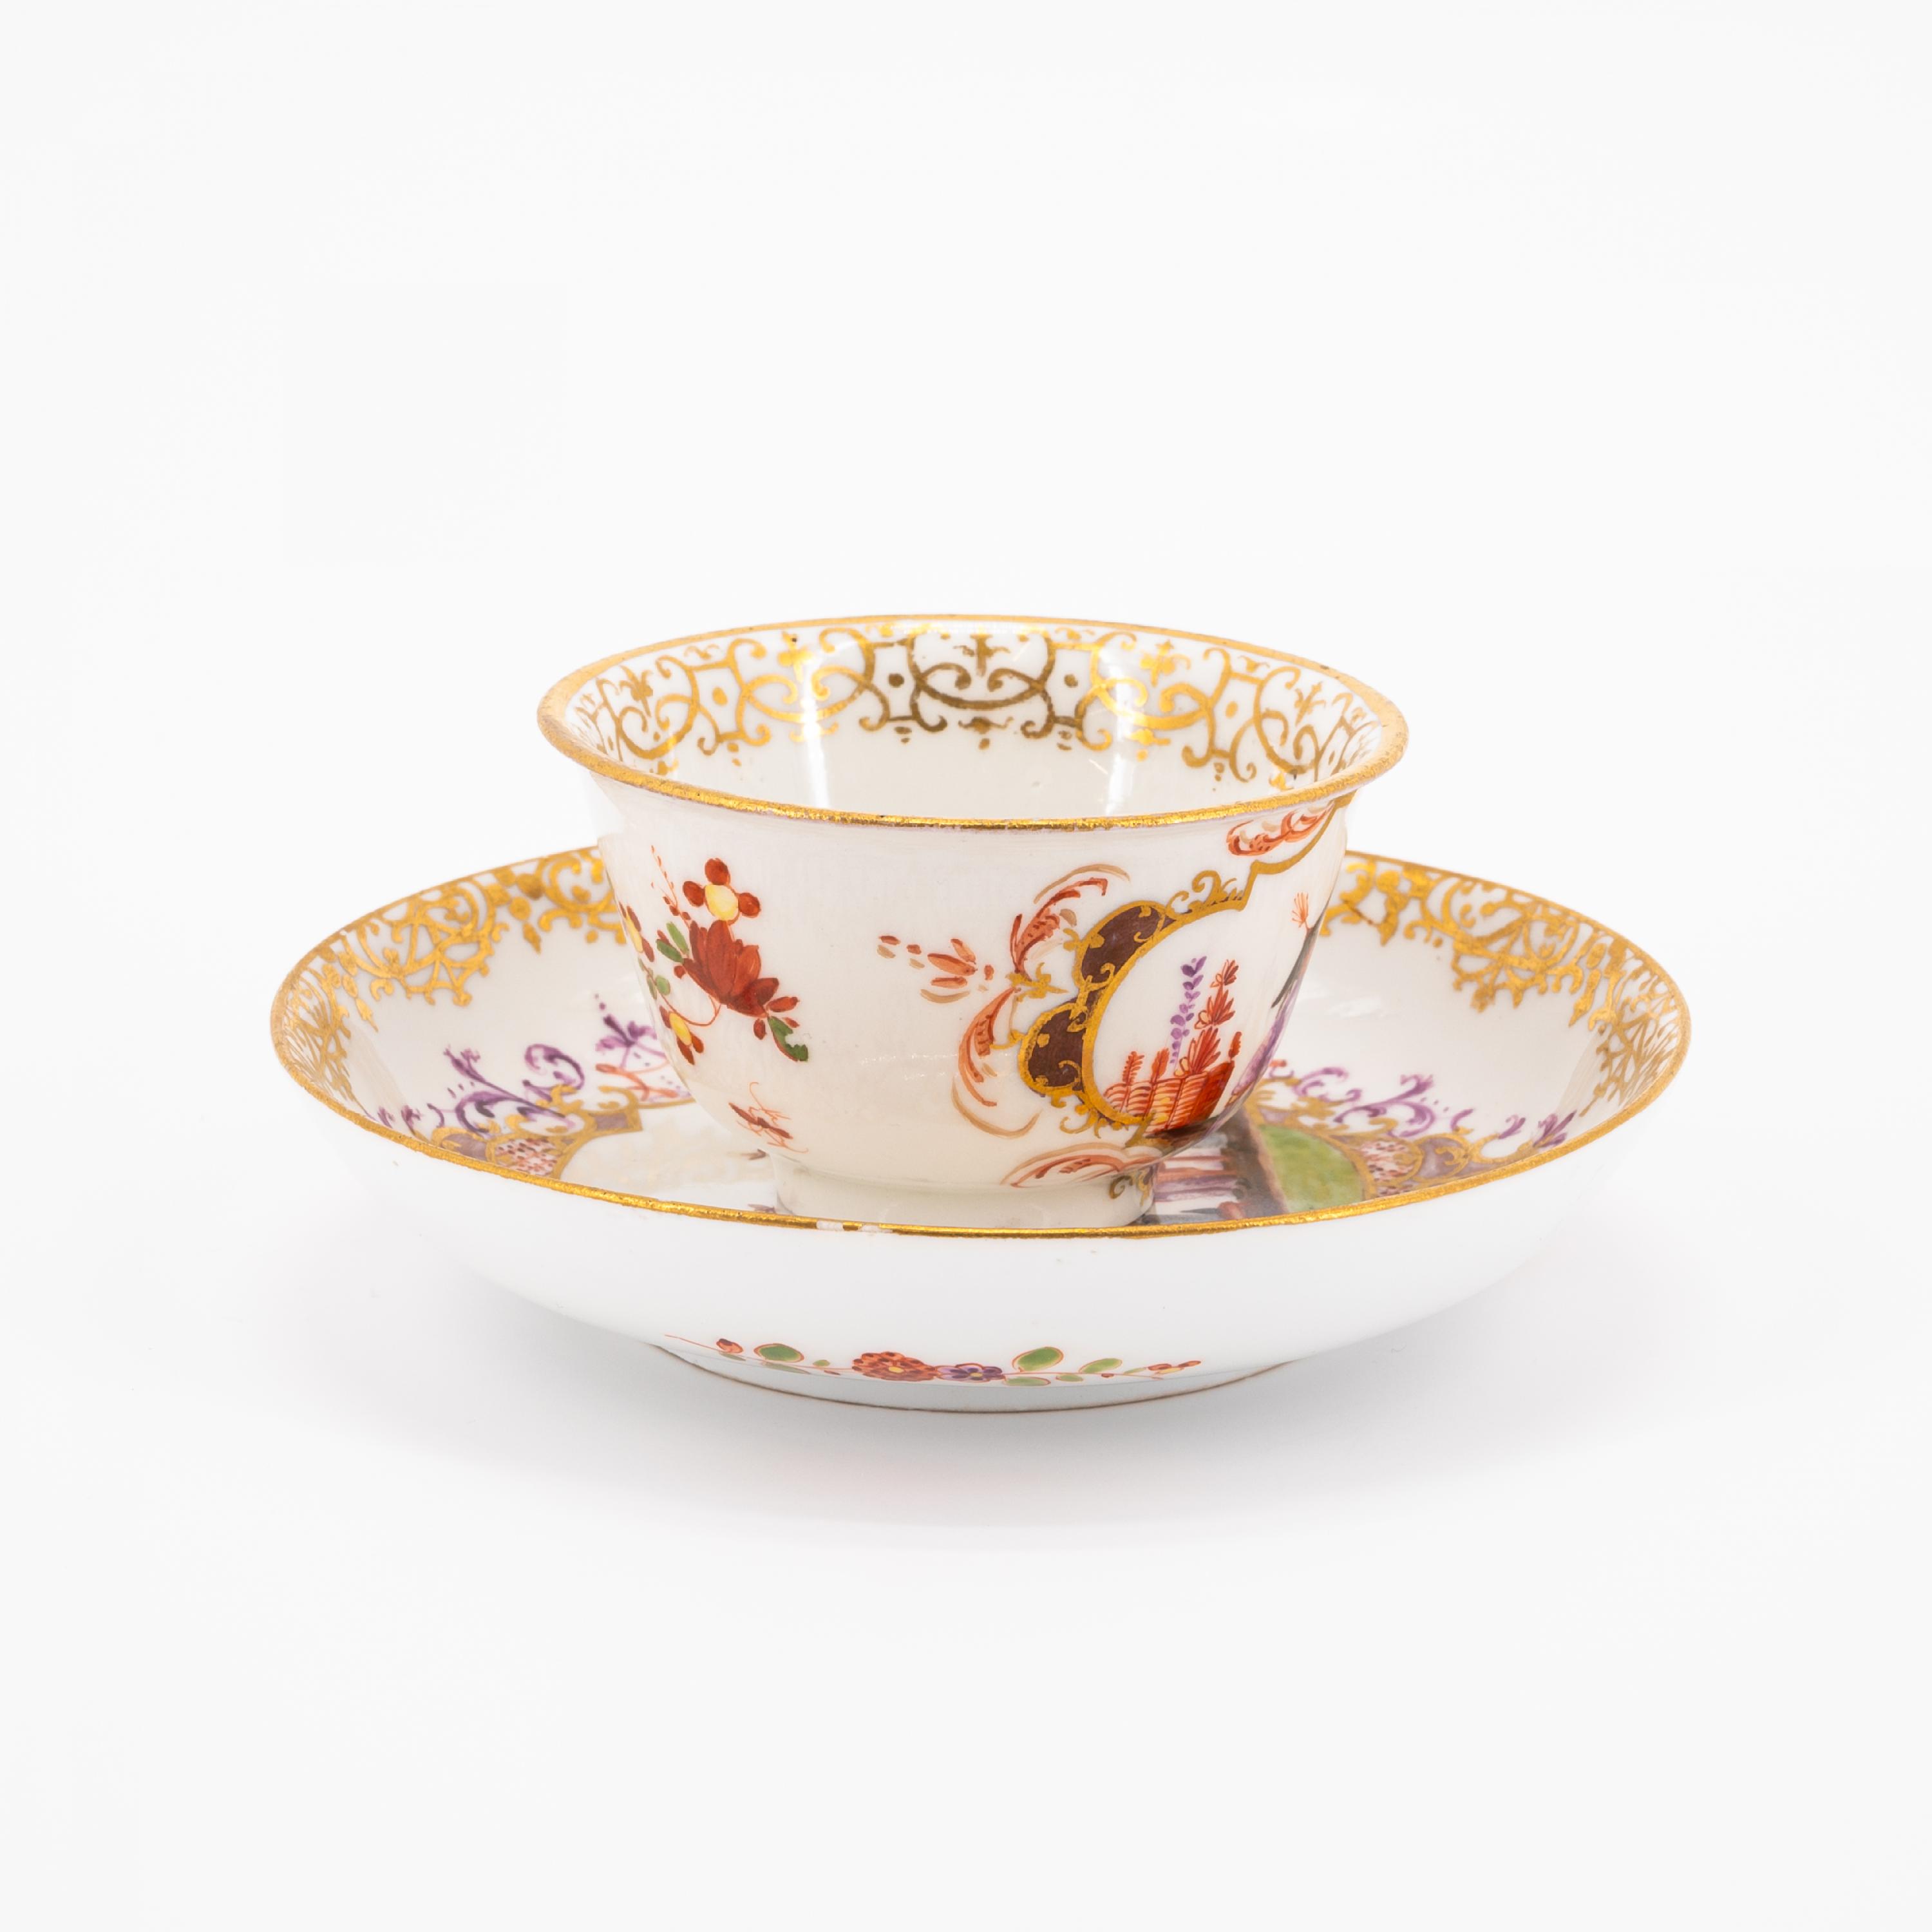 TWO PORCELAIN TEA BOWLS WITH SAUERES AND CHINOISERIES - Image 9 of 11